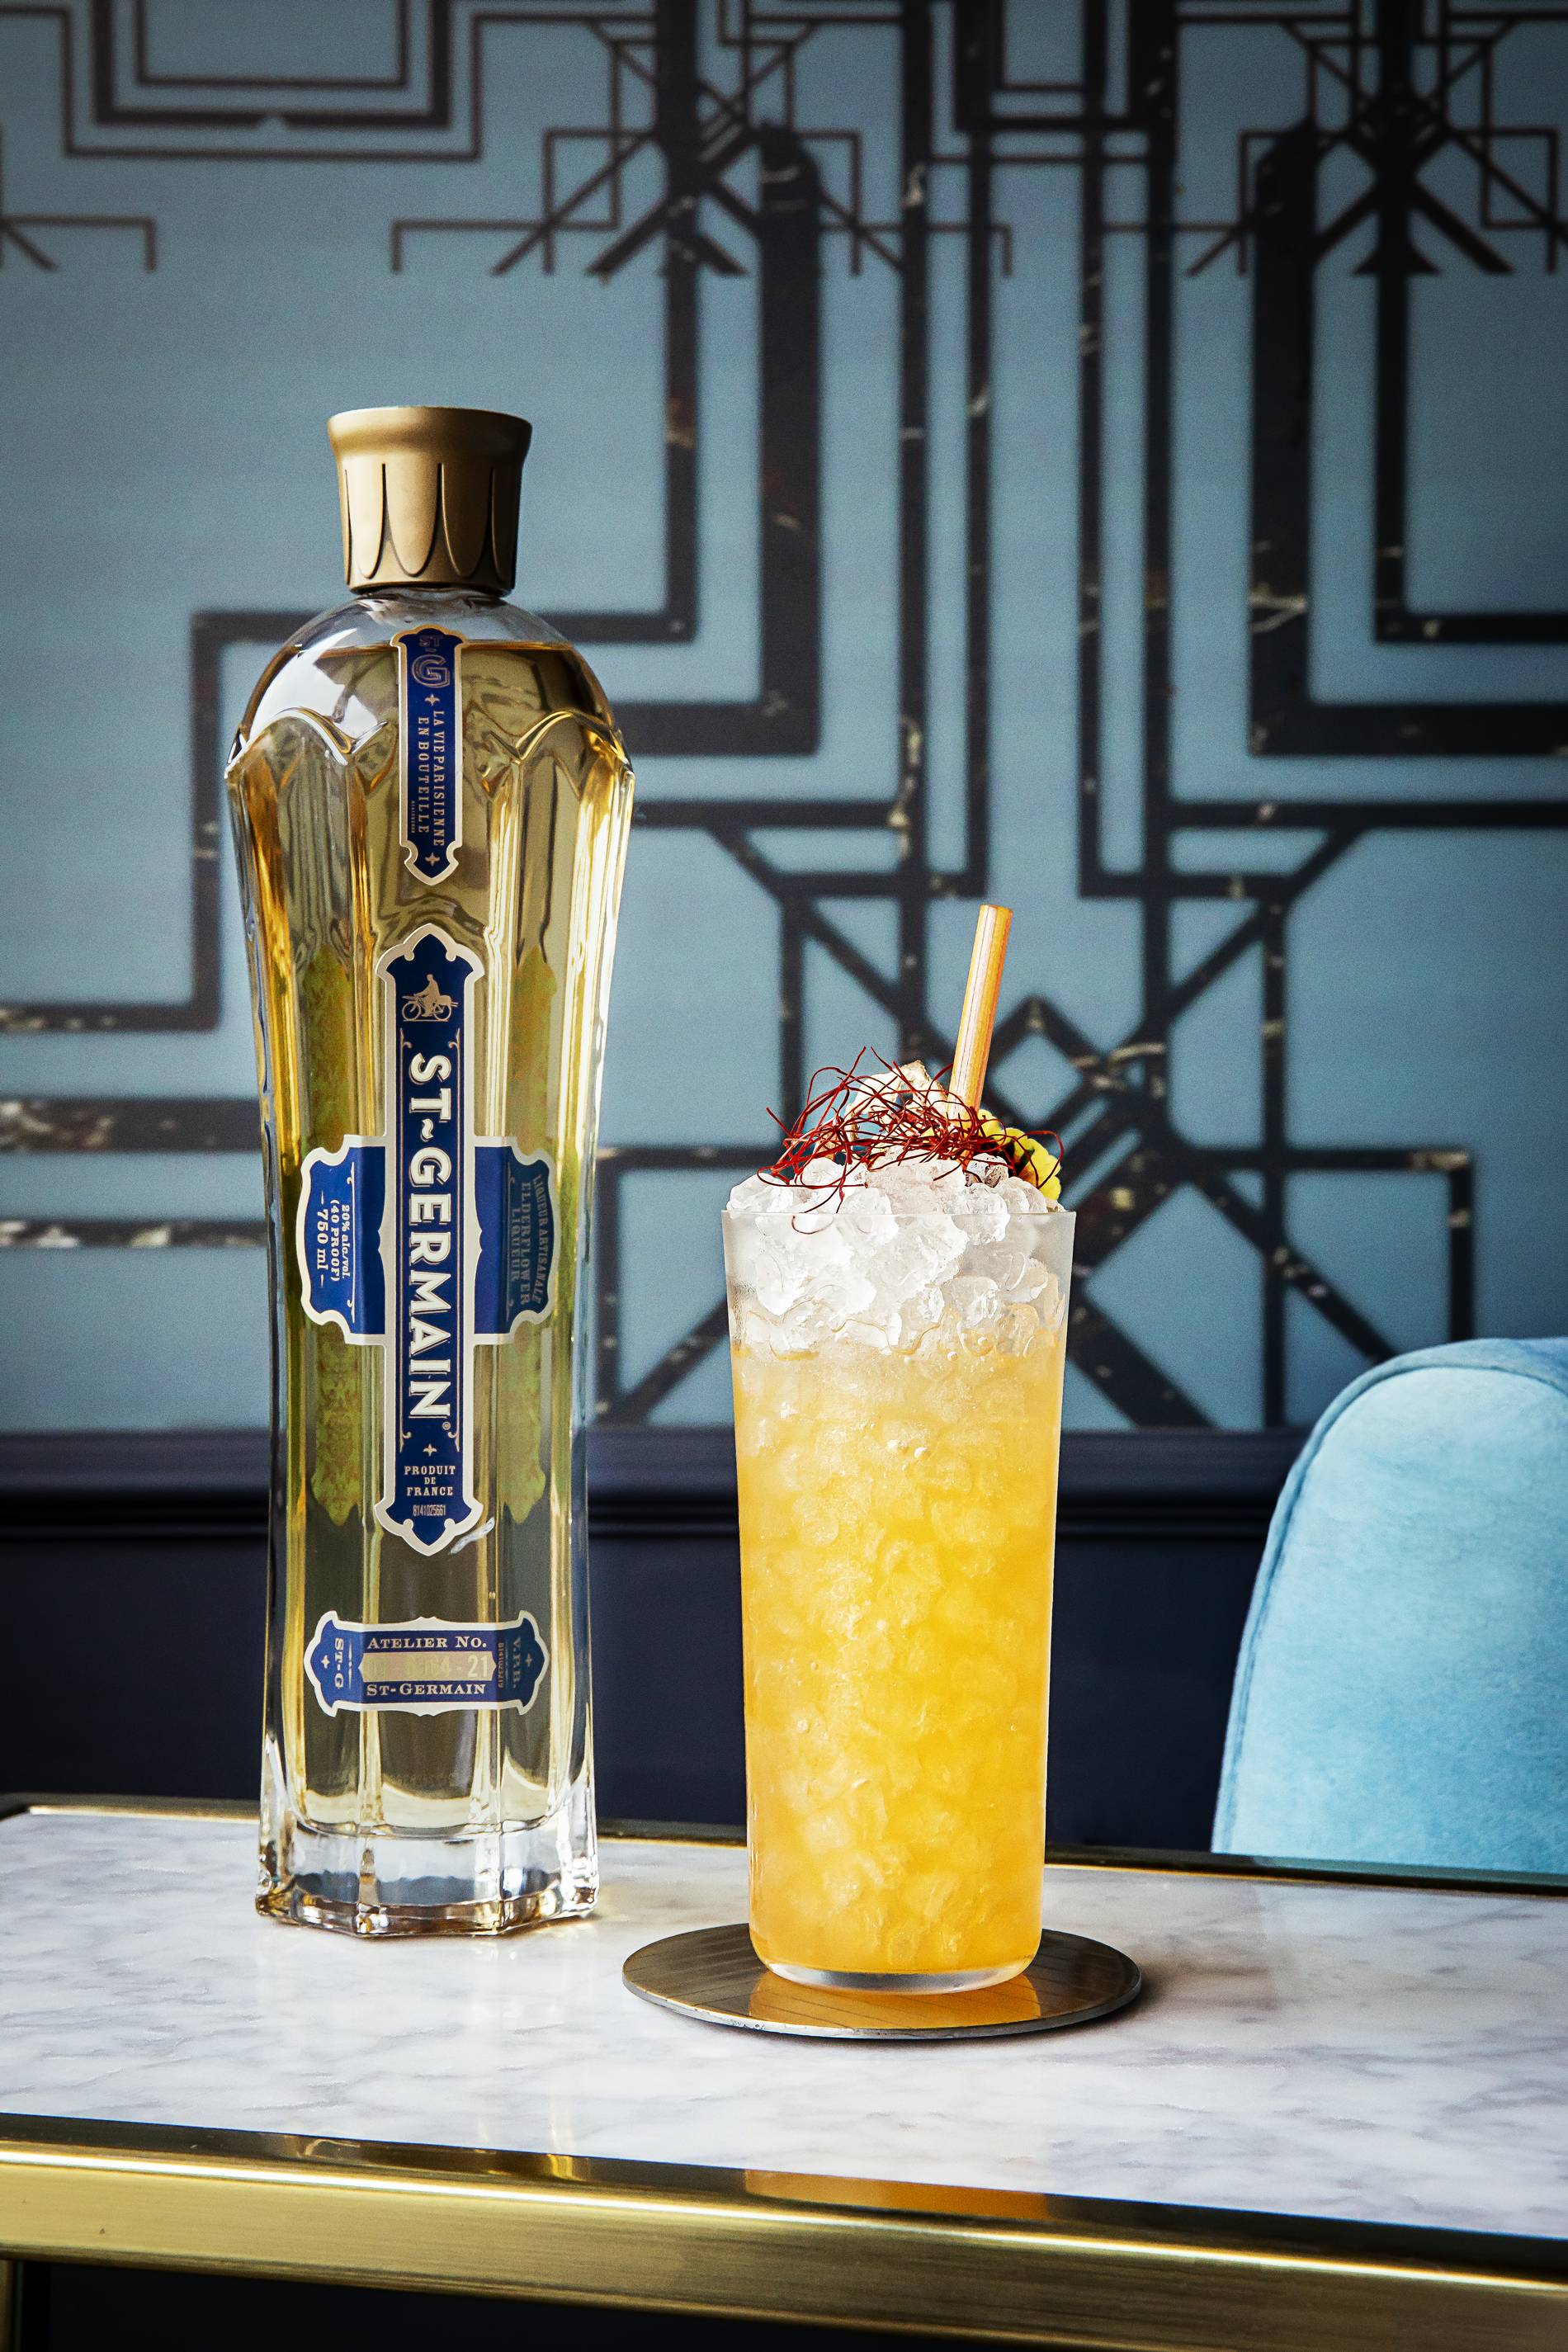 jameel mohammed's songbird cocktail by st-germain